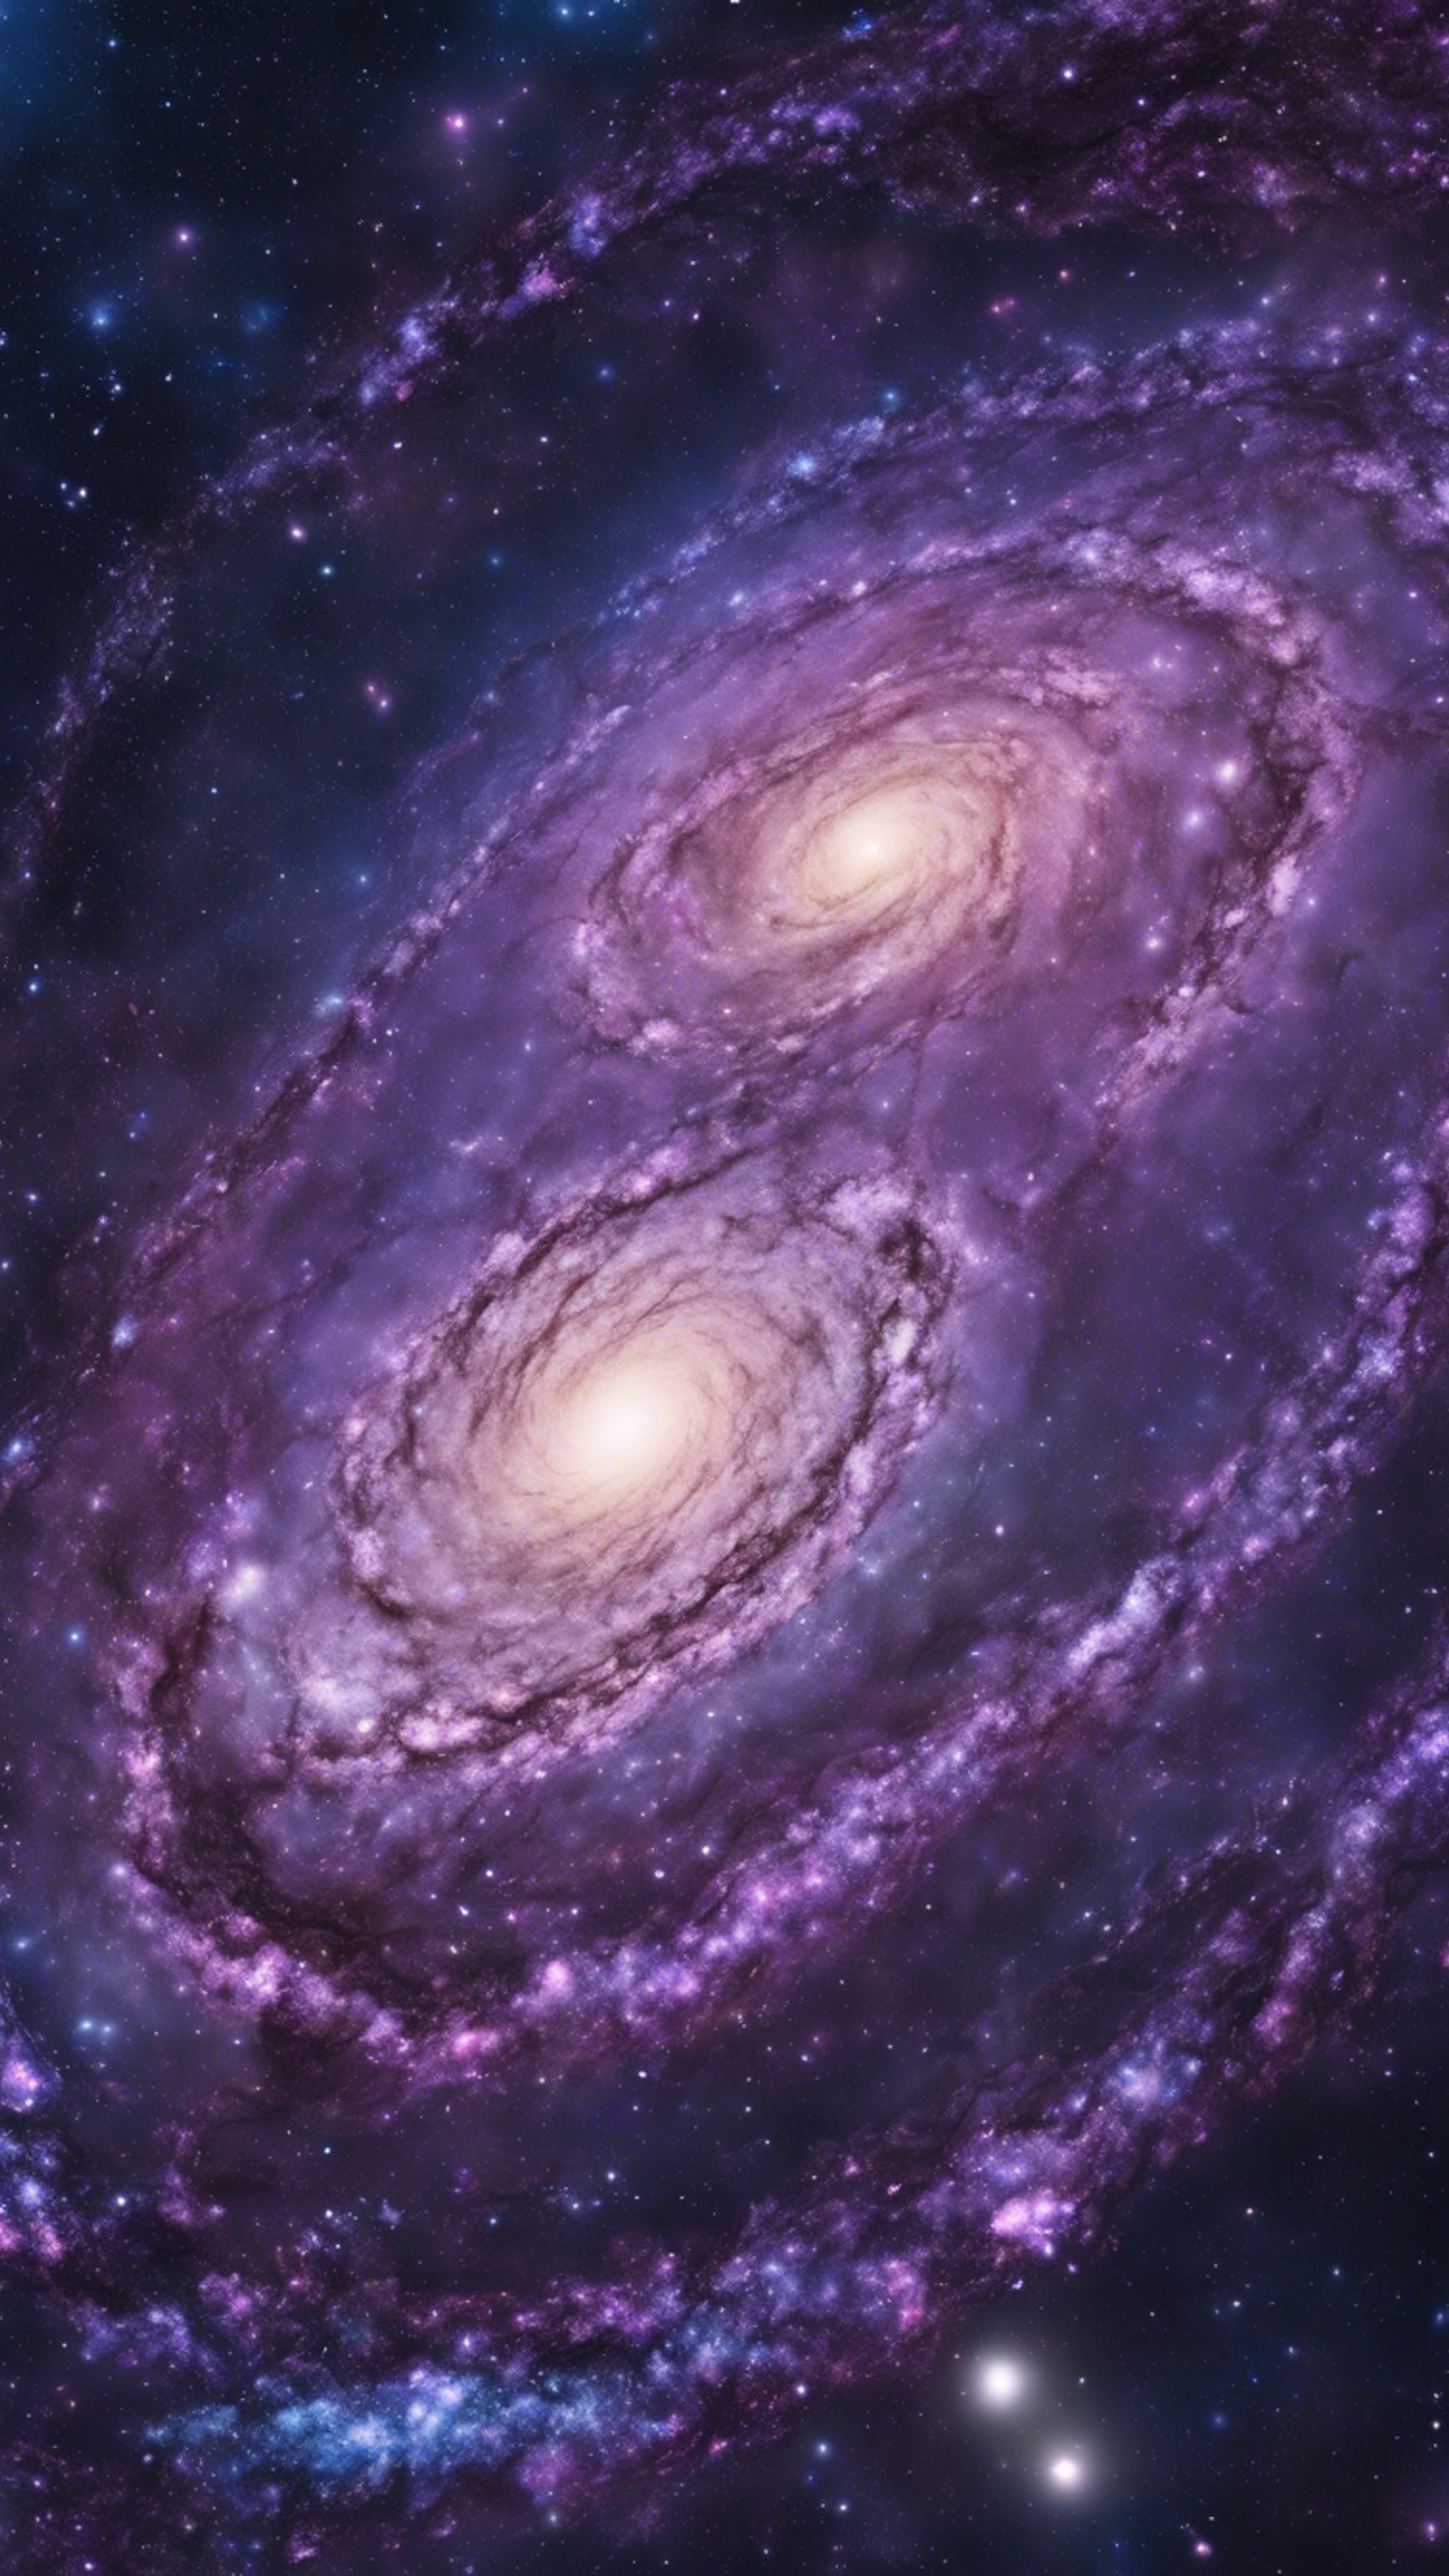 A spectacular galaxy with swirling patterns of purples and blues.壁紙[e57f5ee32b94469cbfb9]